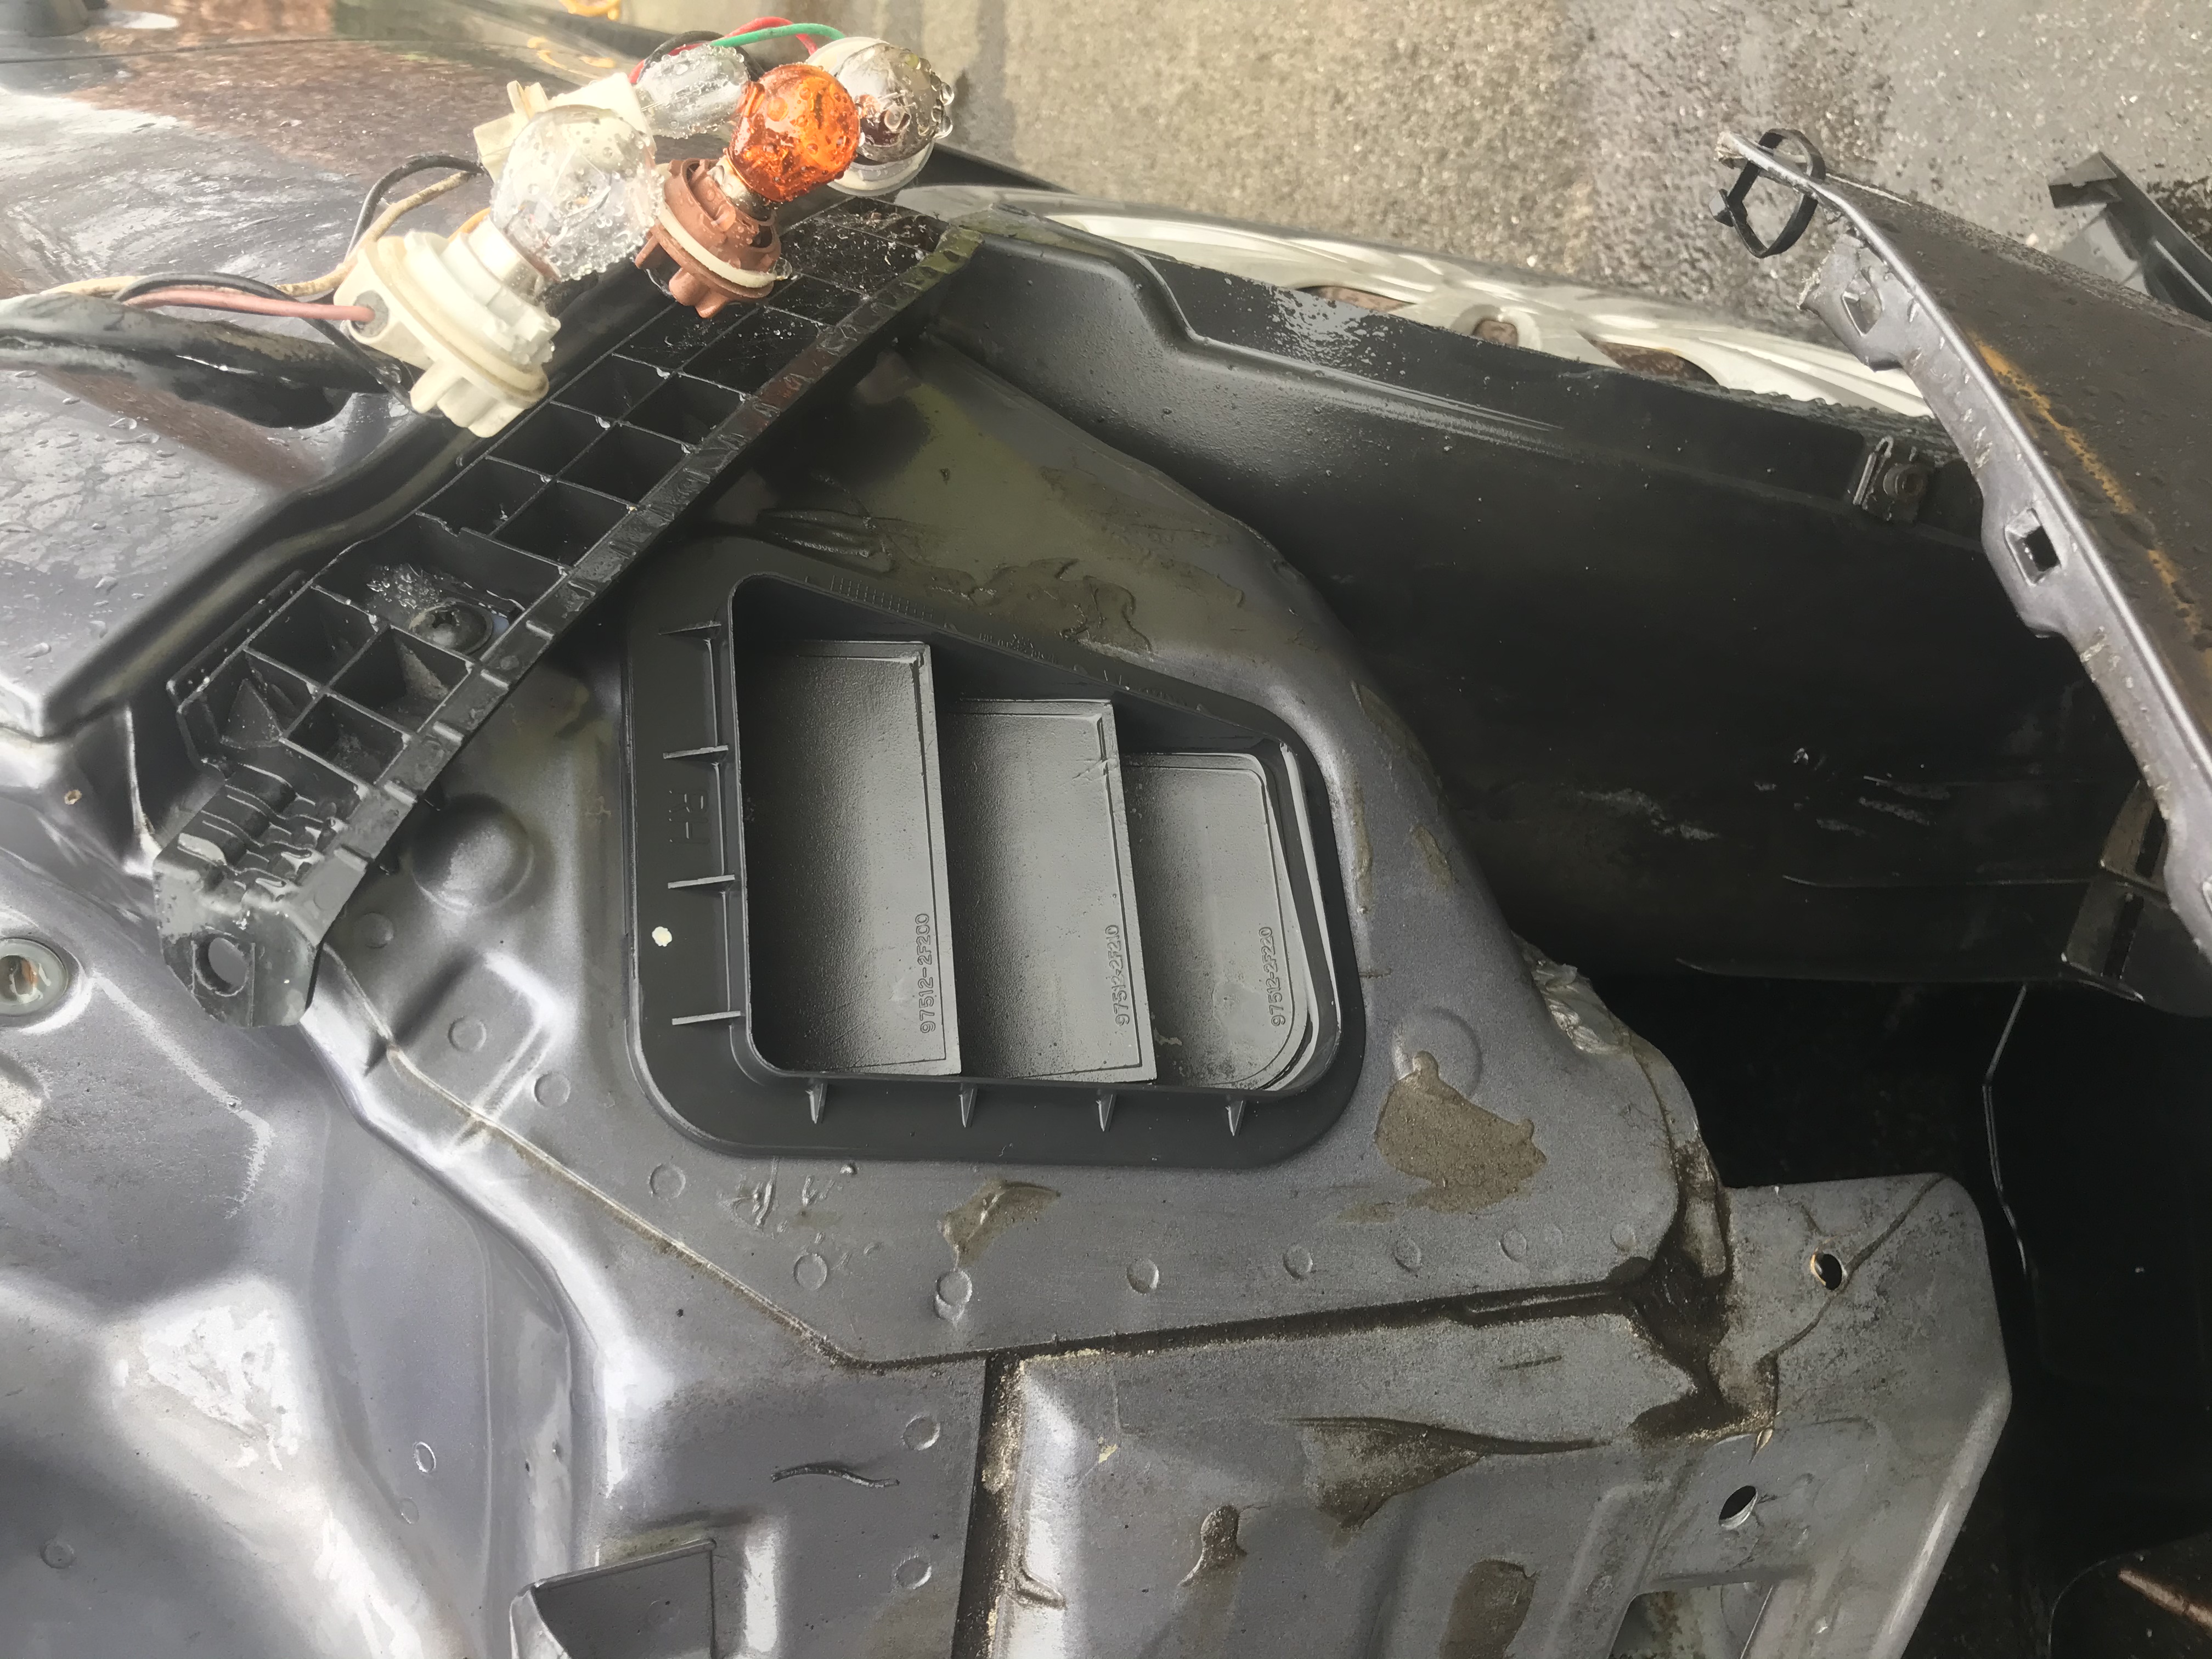 Image for [SOLVED] Hyundai i20 water leak - from roof trim? 